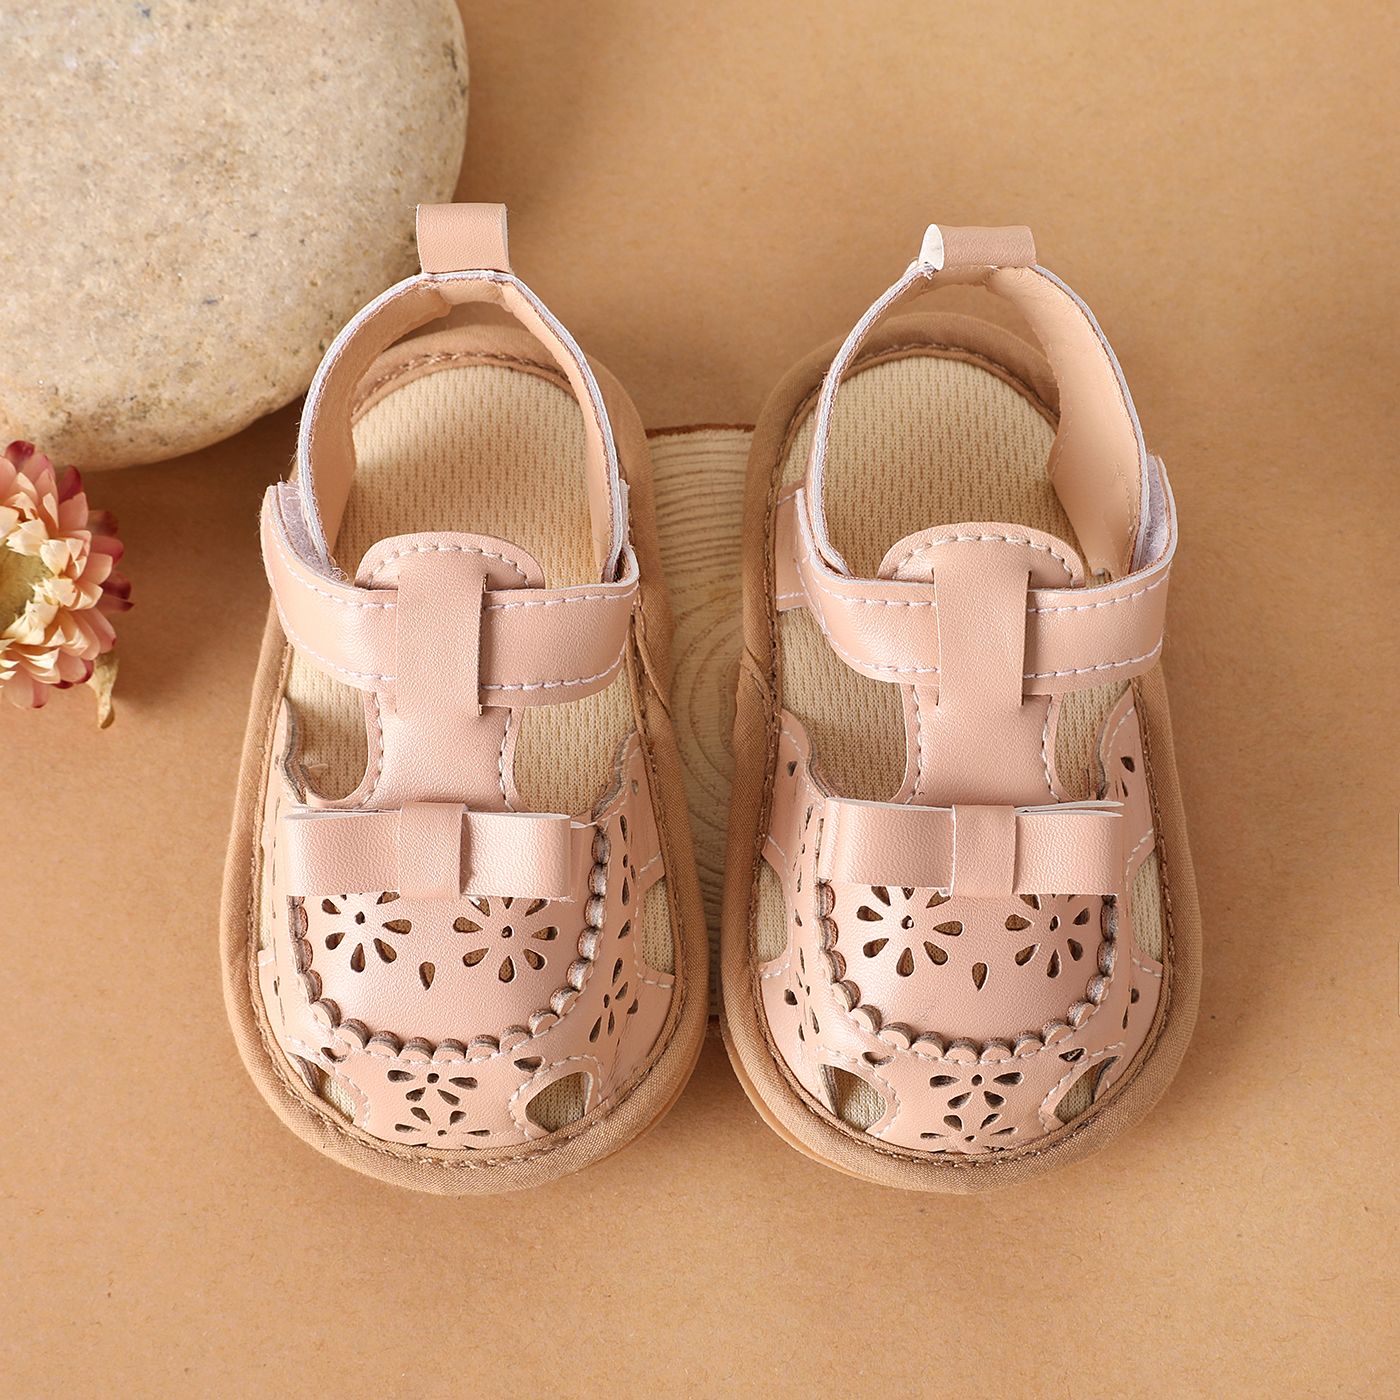 Baby / Toddler Hollow Out Sandals Prewalker Shoes